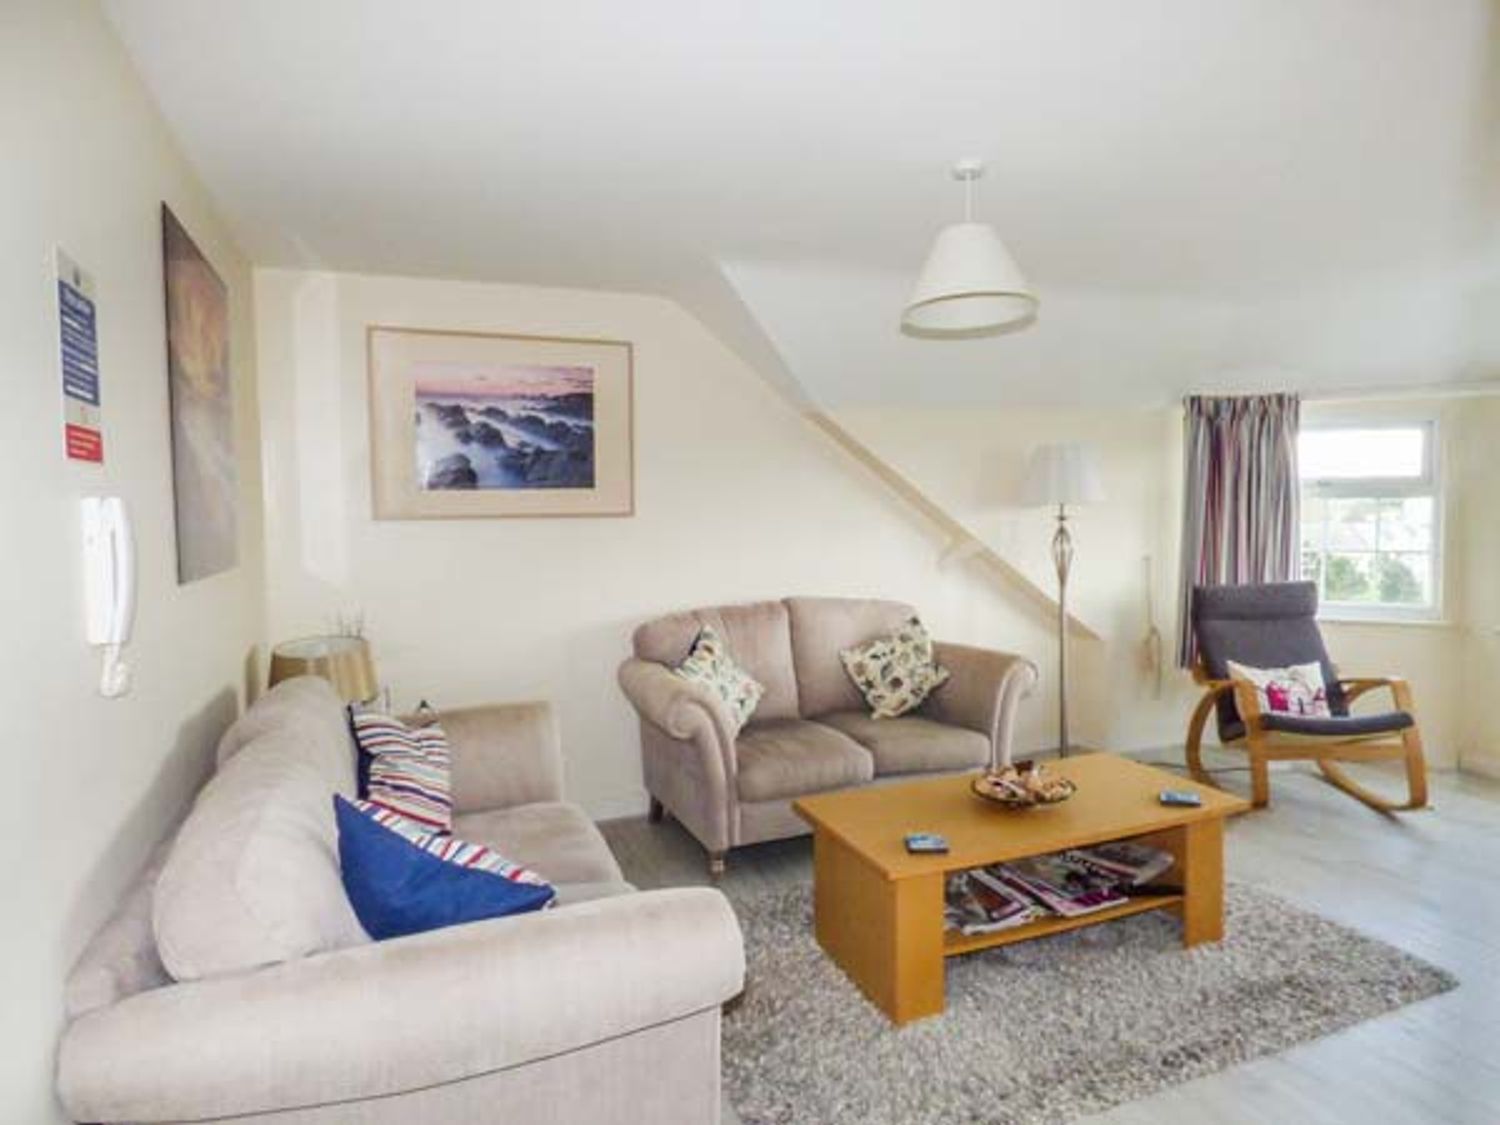 Flat 11 - Anglesey - 958252 - photo 1